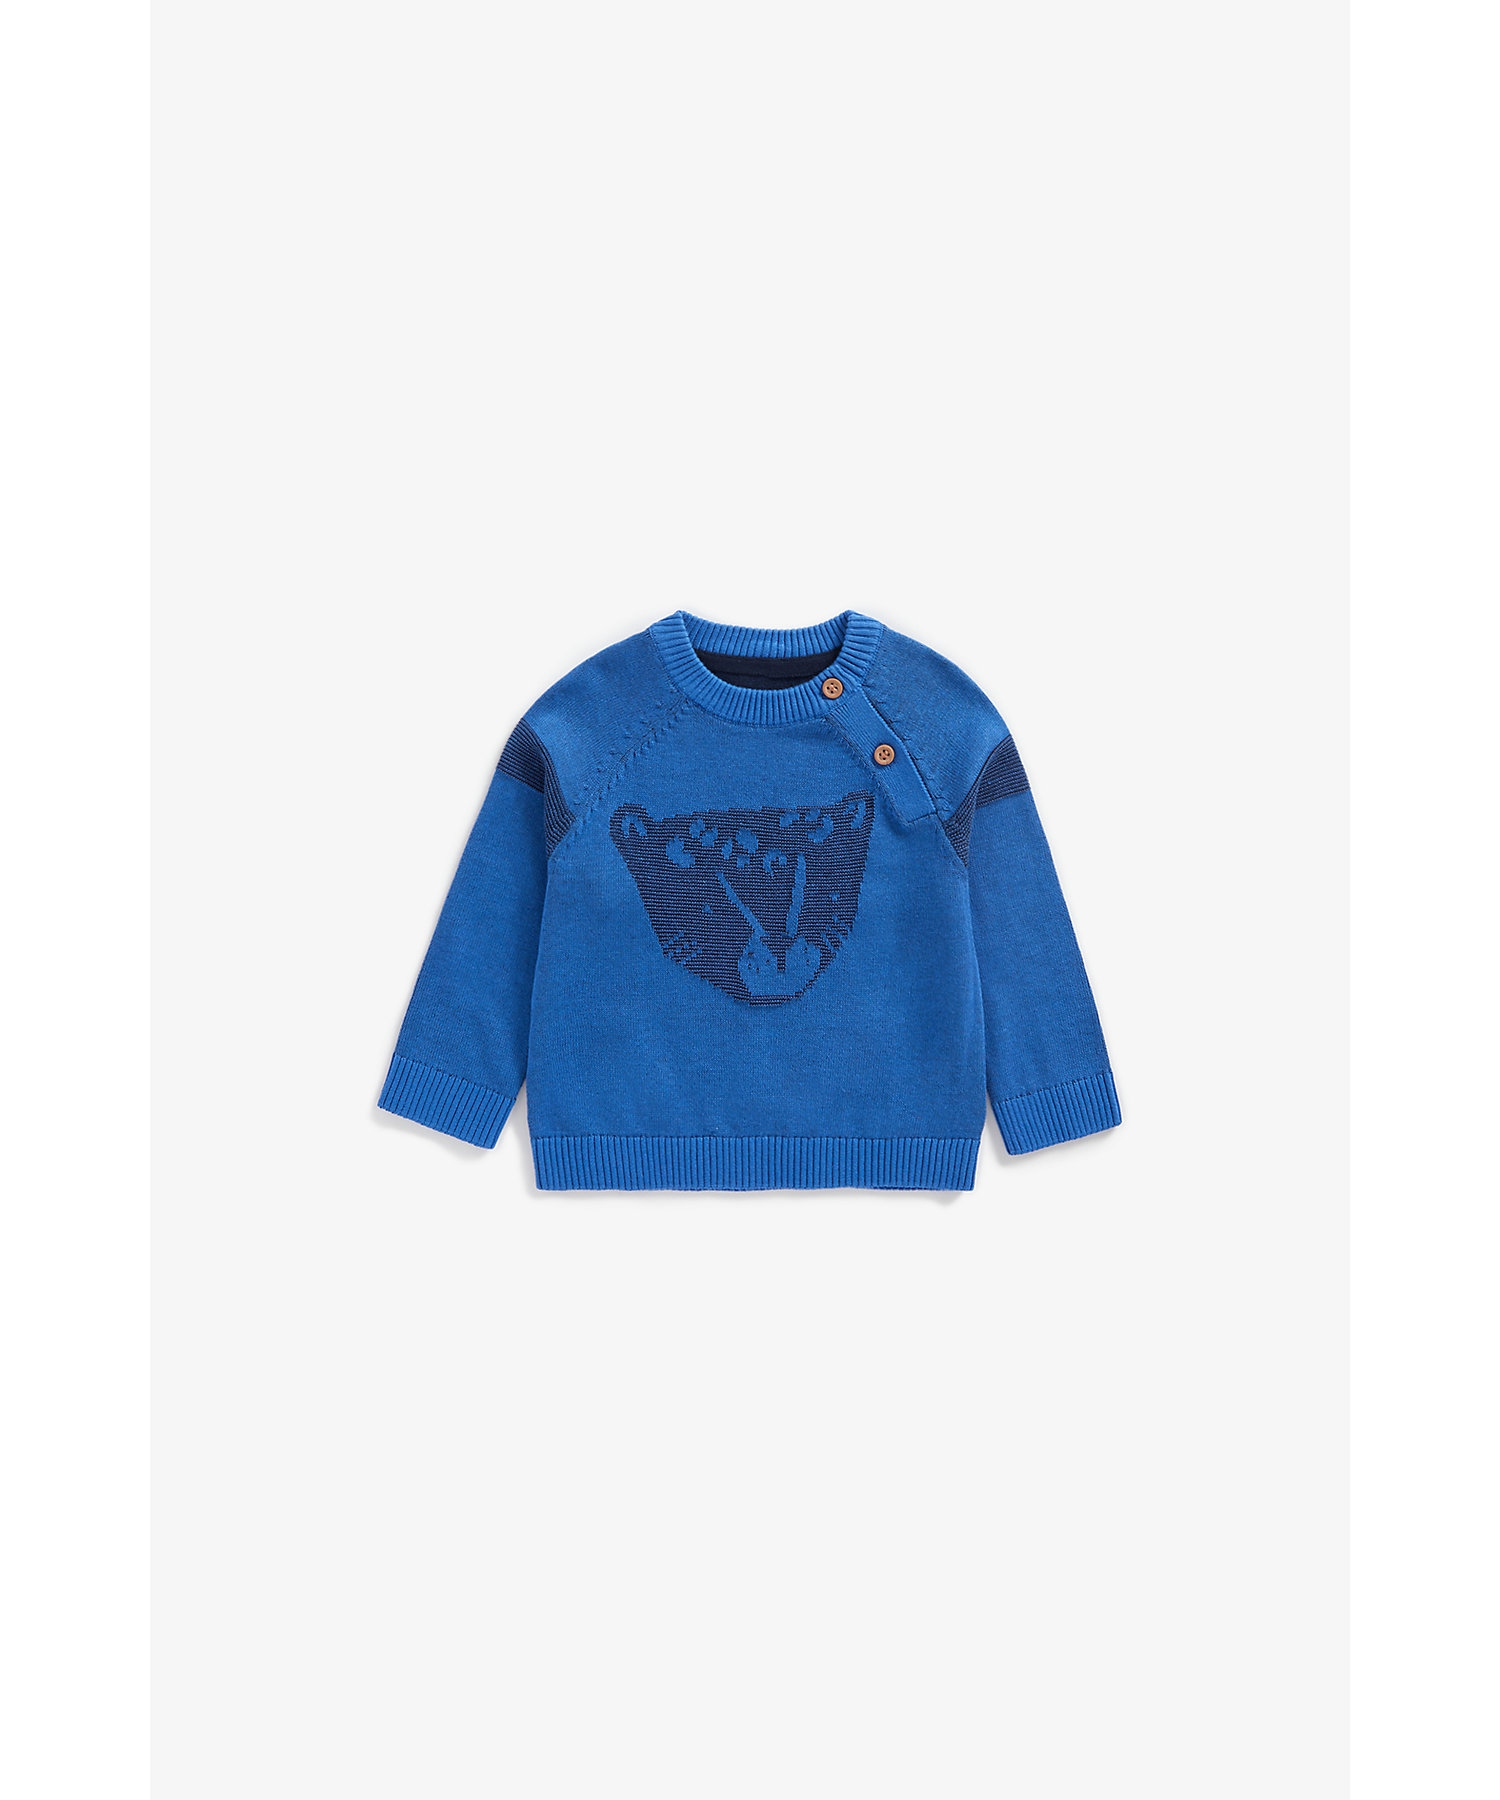 Mothercare | Boys Full Sleeves Sweater Leopard Design - Blue